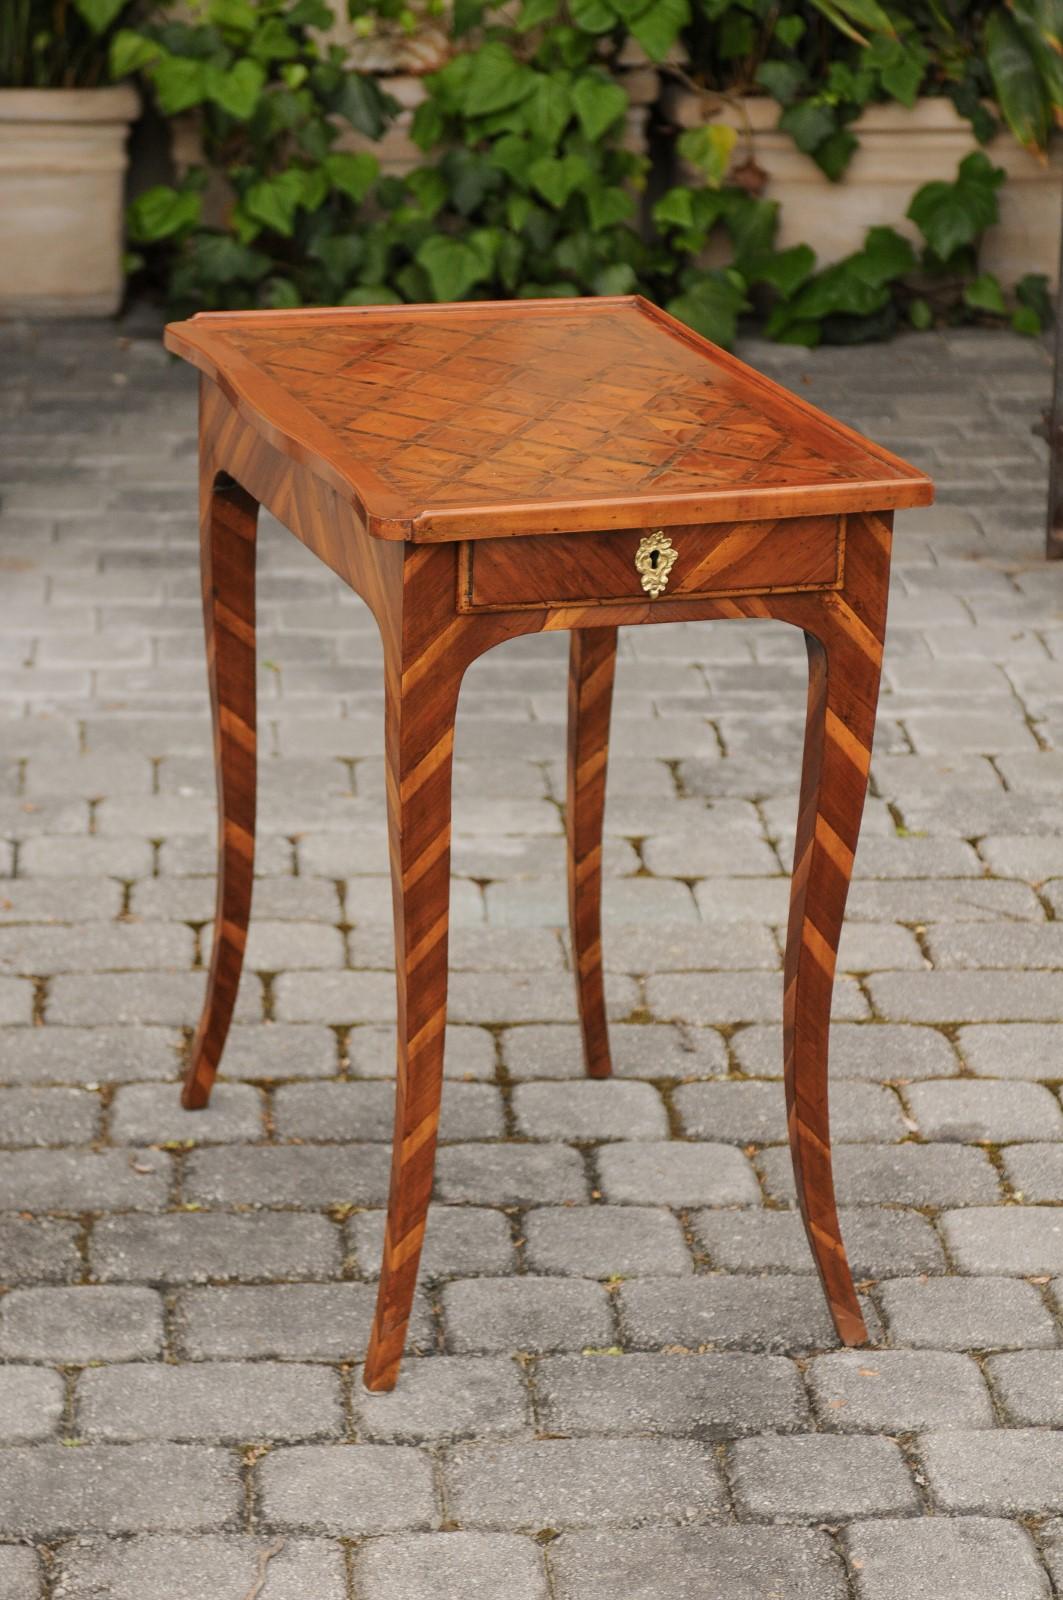 Italian 1820s Walnut Side Table with Marquetry Top, Inlaid Legs and Side Drawer For Sale 5